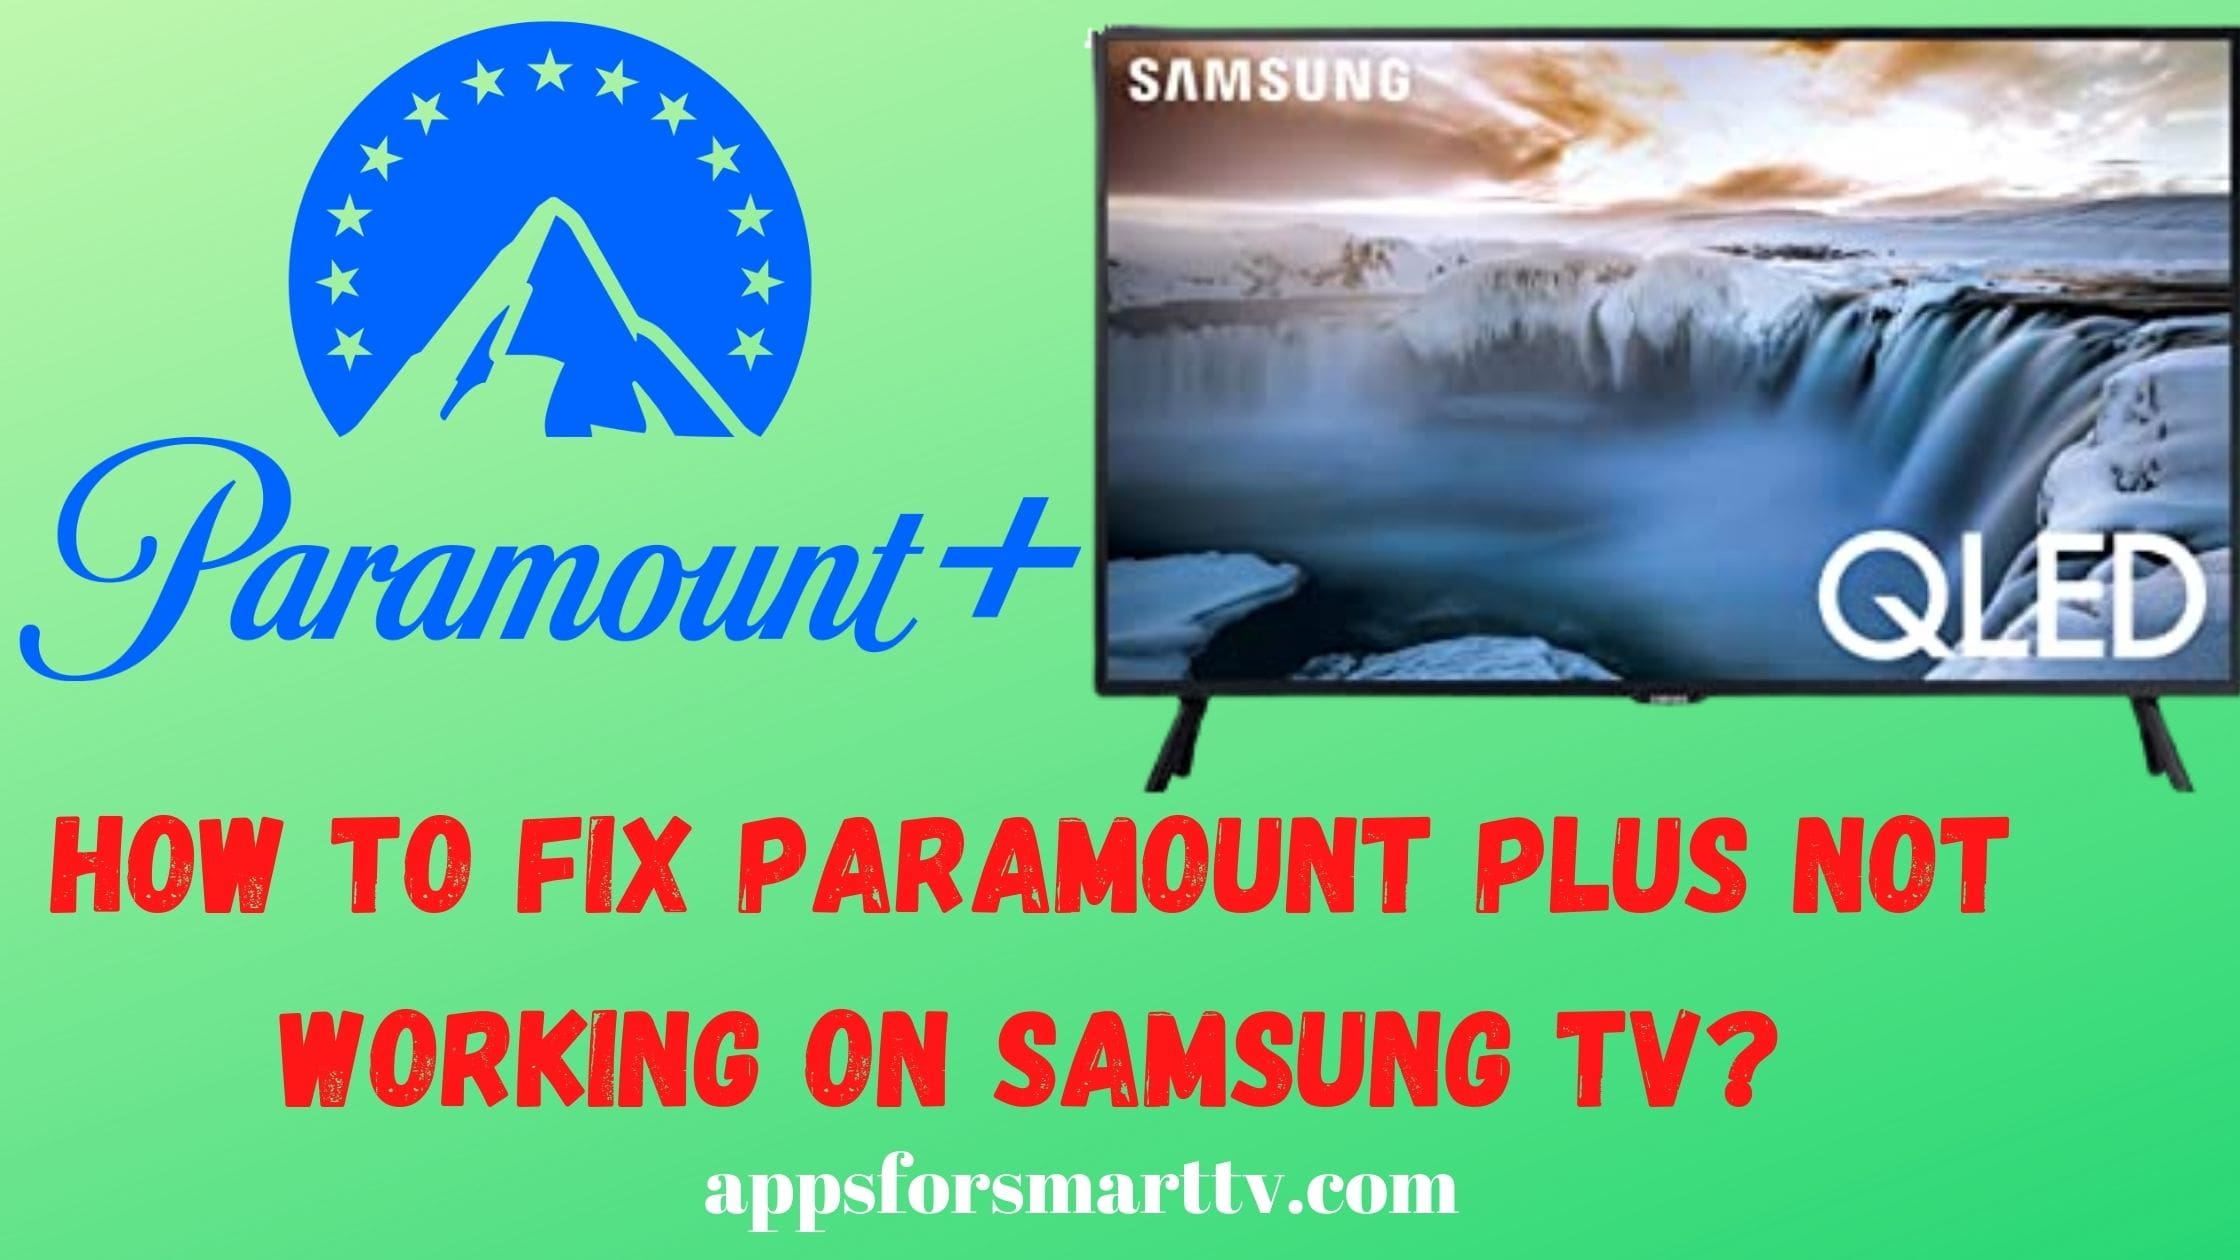 How to Fix Paramount Plus Not Working on Samsung TV? - Apps For Smart Tv